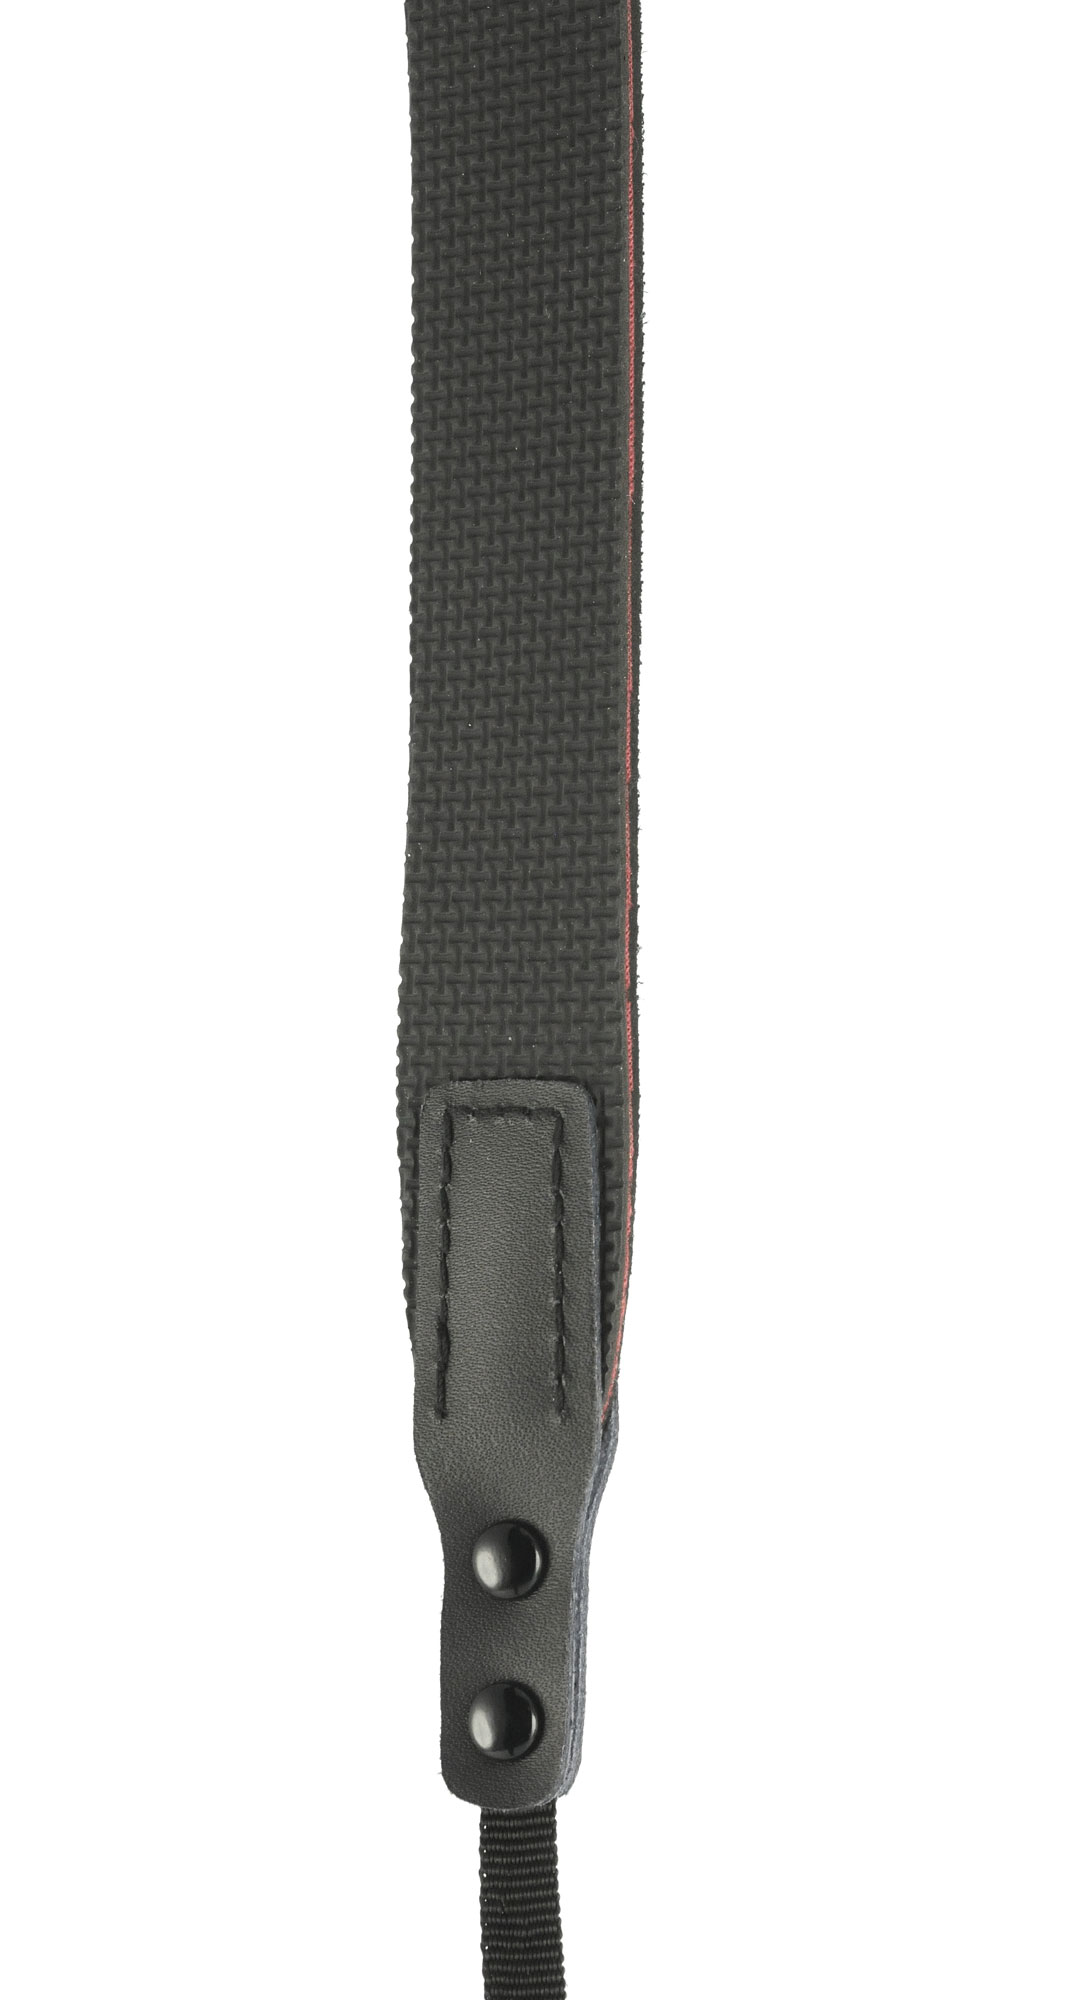 Compact quick release strap